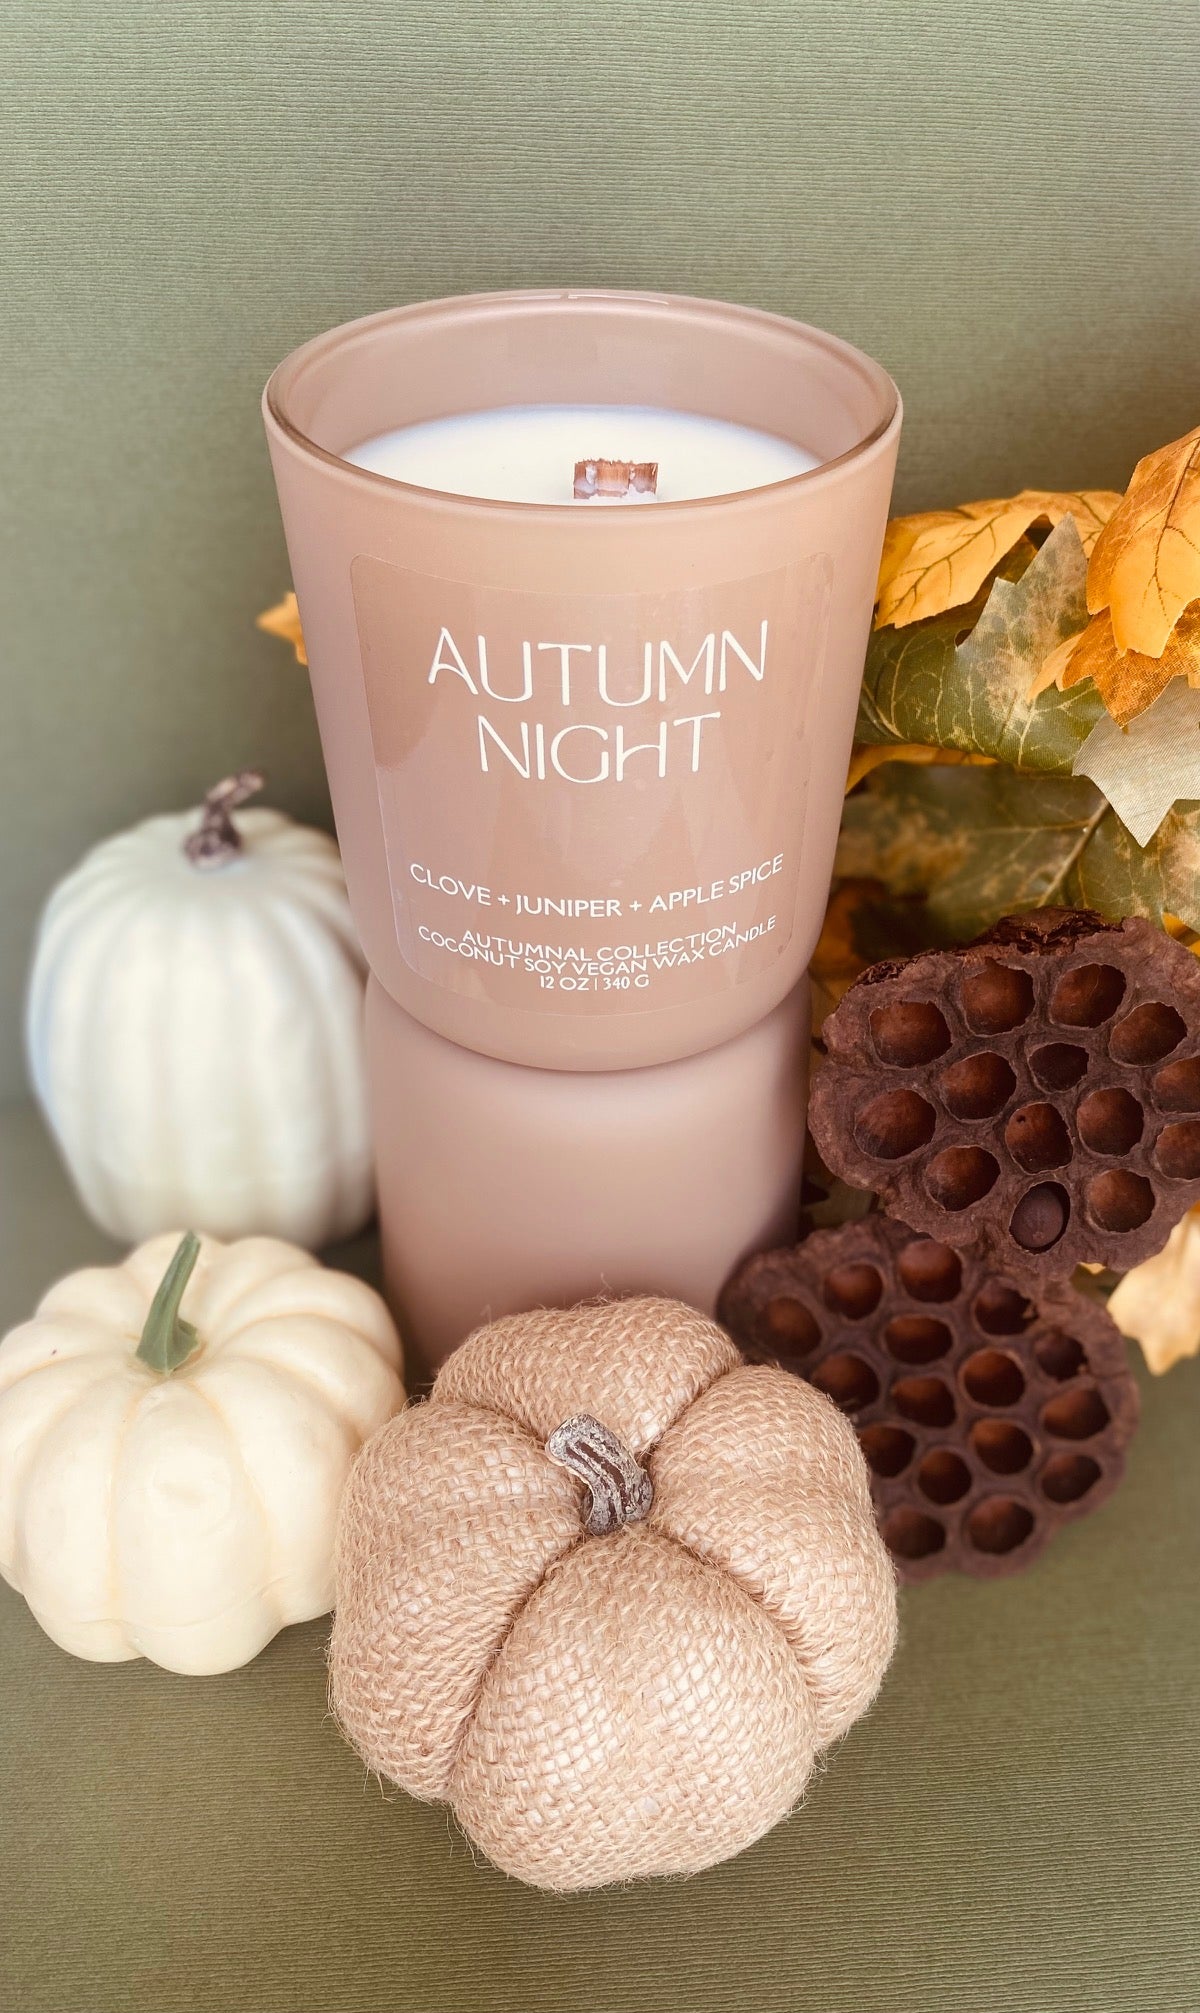 best fall candle autumn glow night clove juniper apple spice lux coconut soy wax candle evening leaves coconut soy wax crackling wood wick